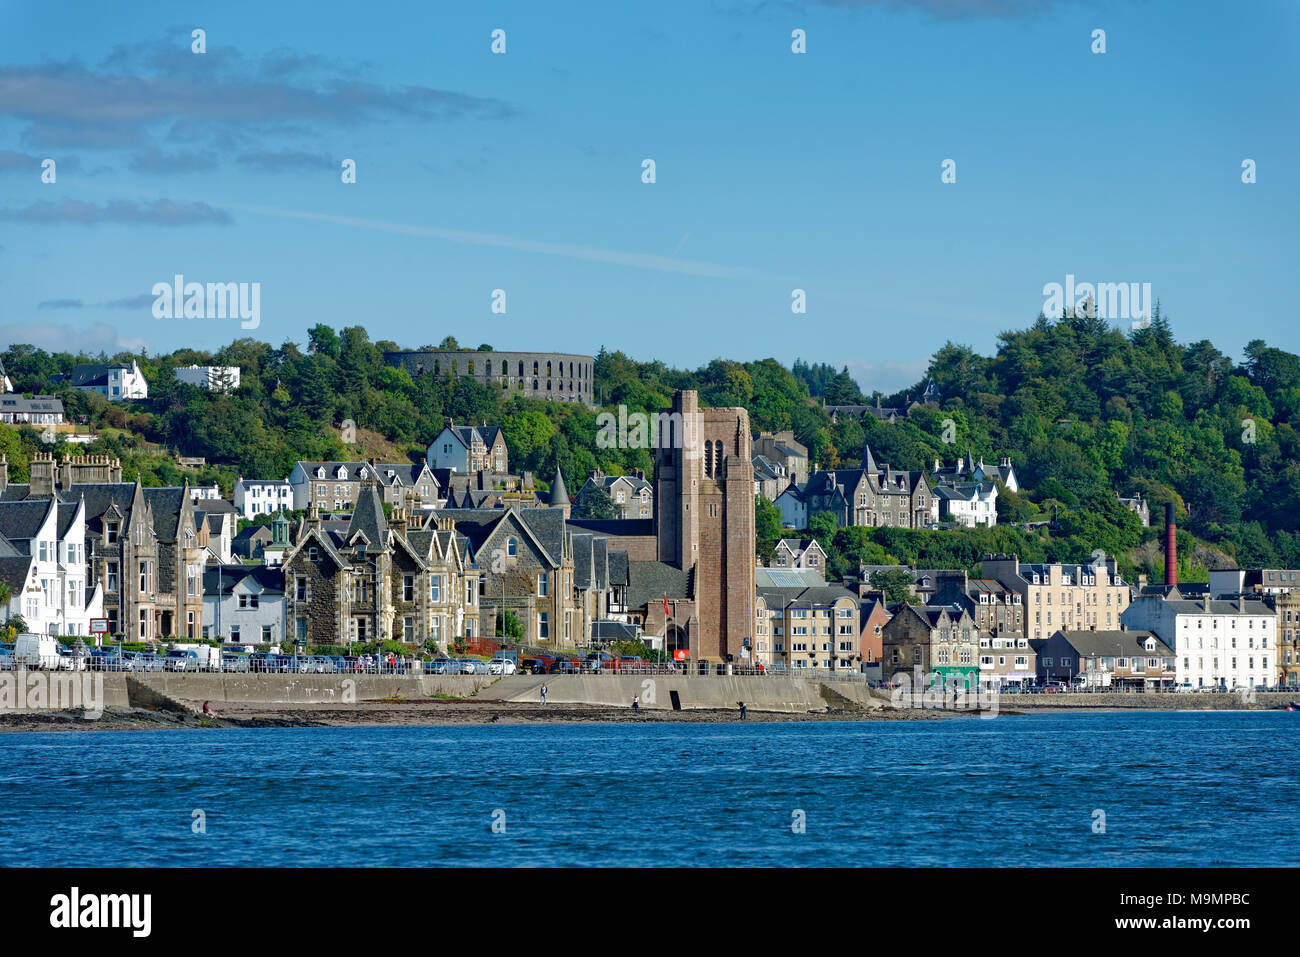 St Columba's Cathedral, on the shore promenade, Oban, Argyll and Bute, Scotland, Great Britain Stock Photo